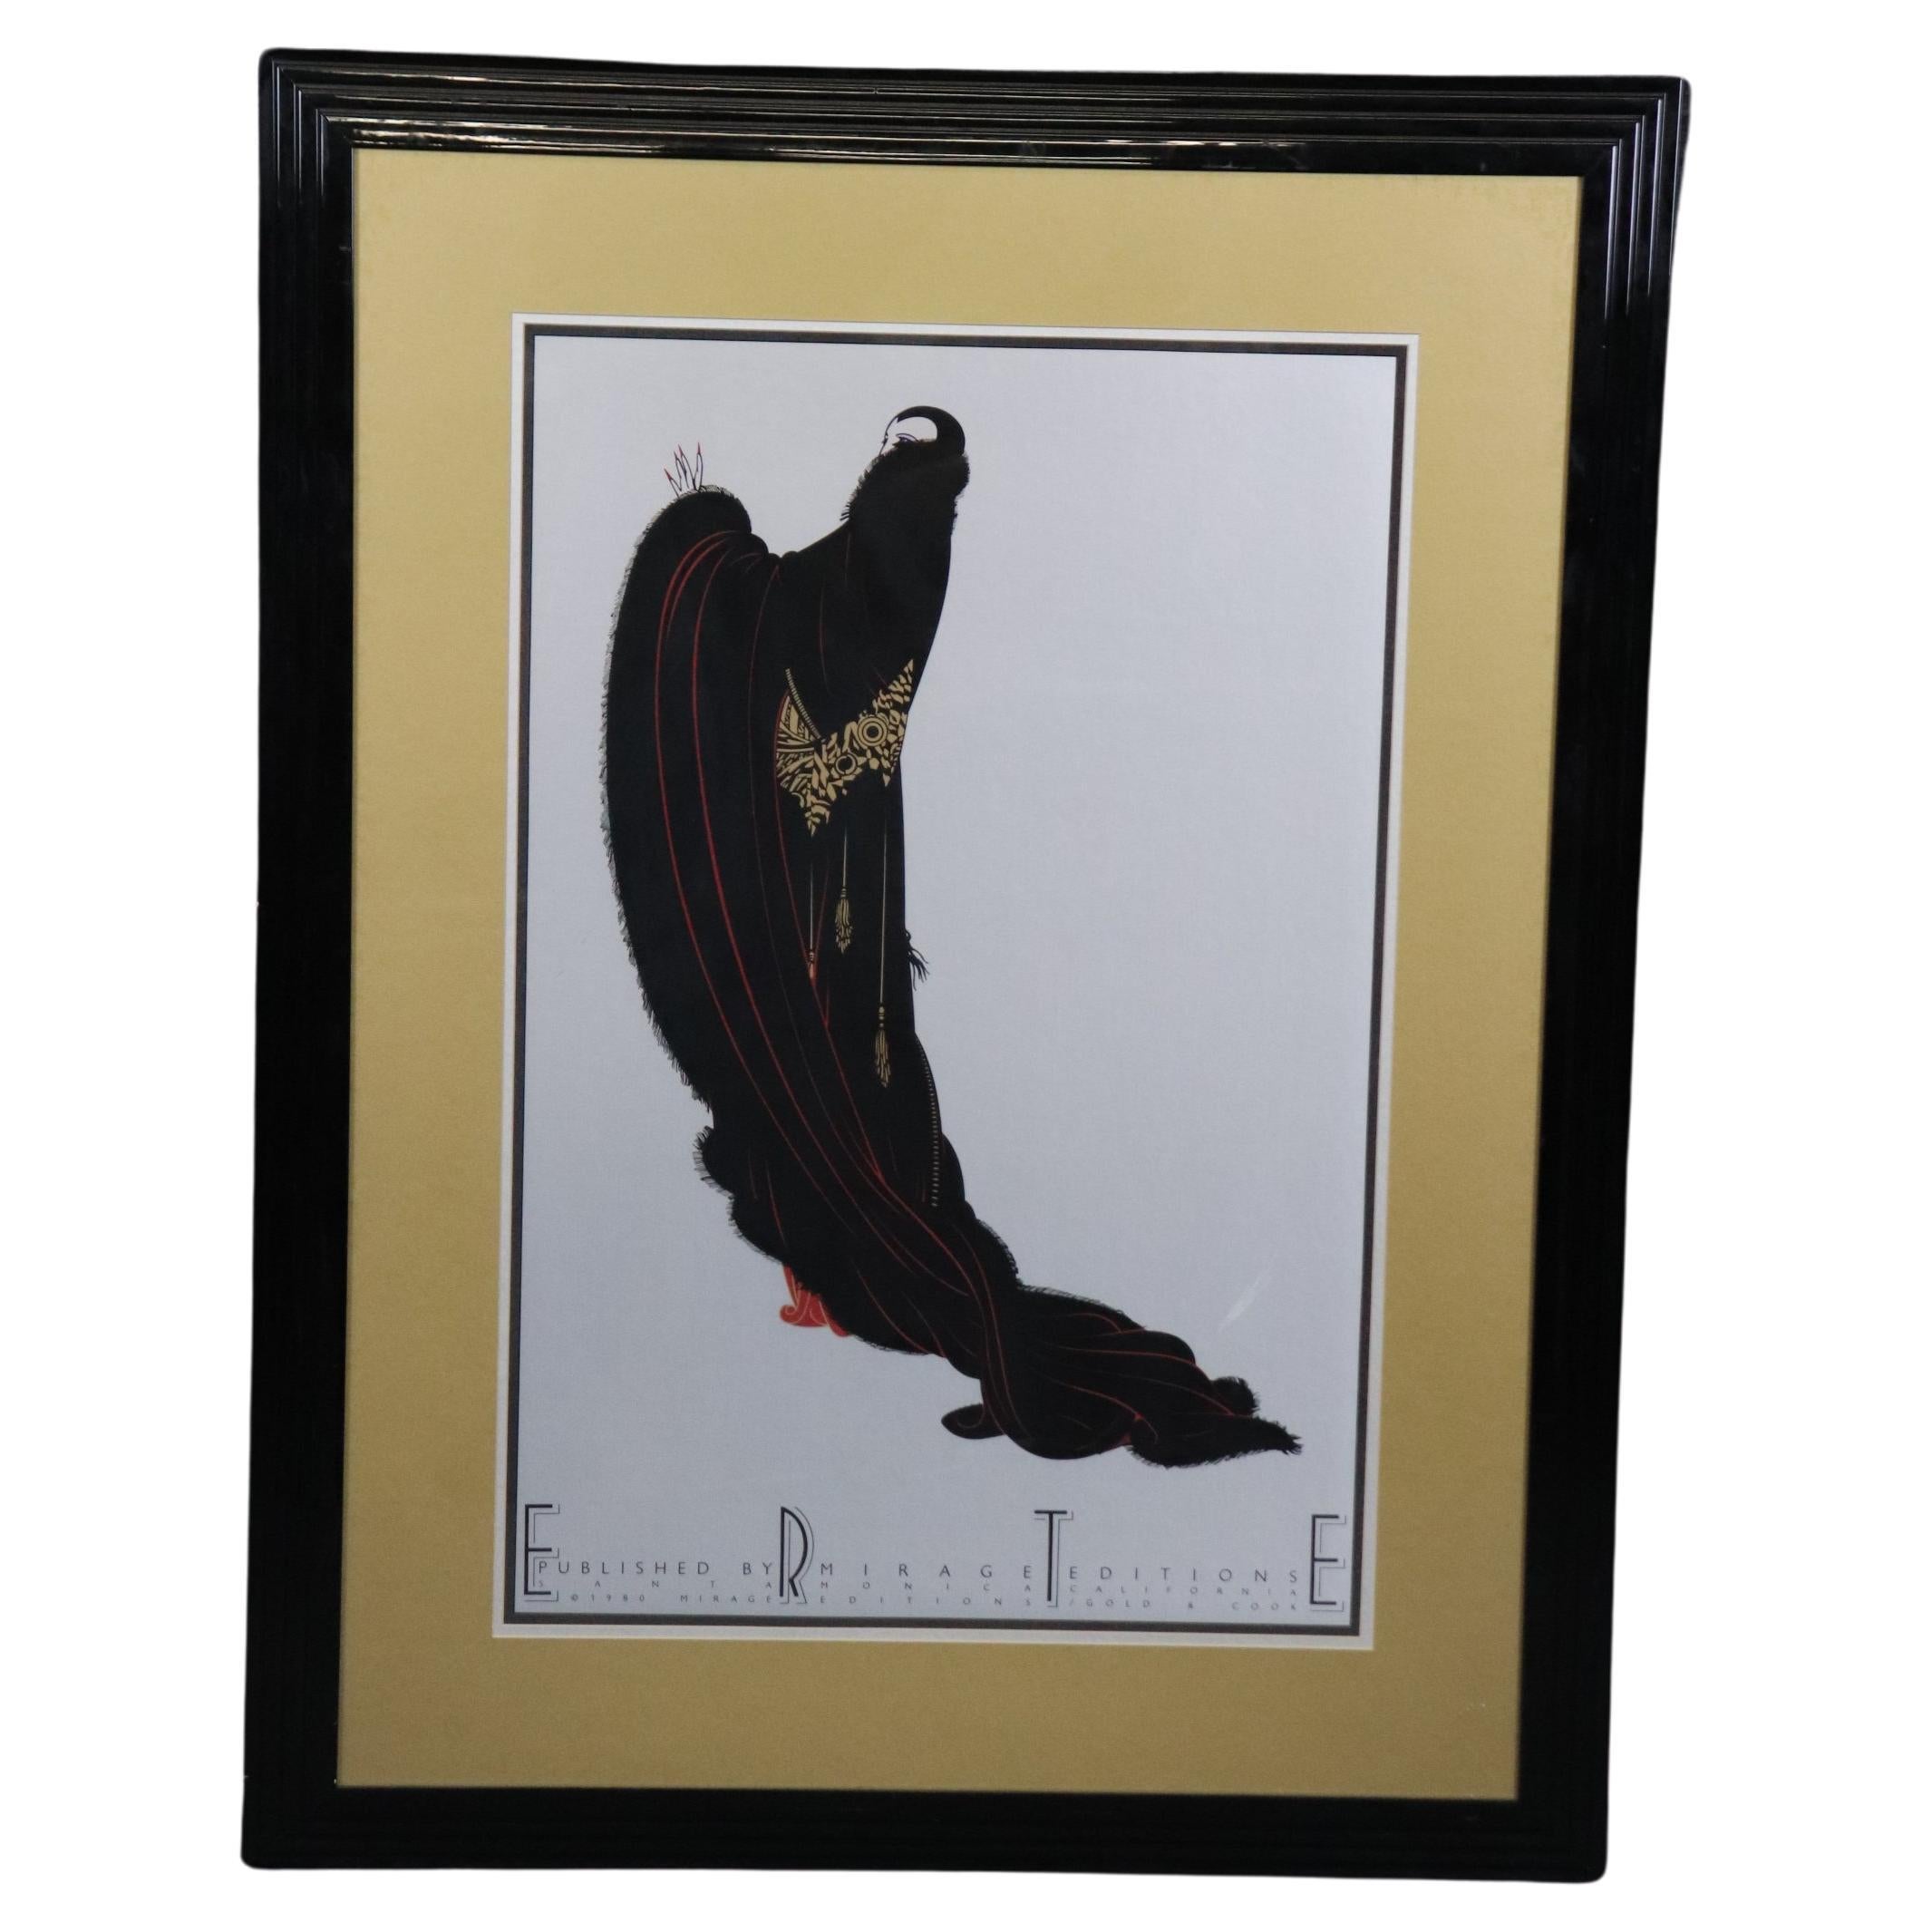 Art Deco Erté Framed Signed Serigraph of a Women Dressed as Dracula 